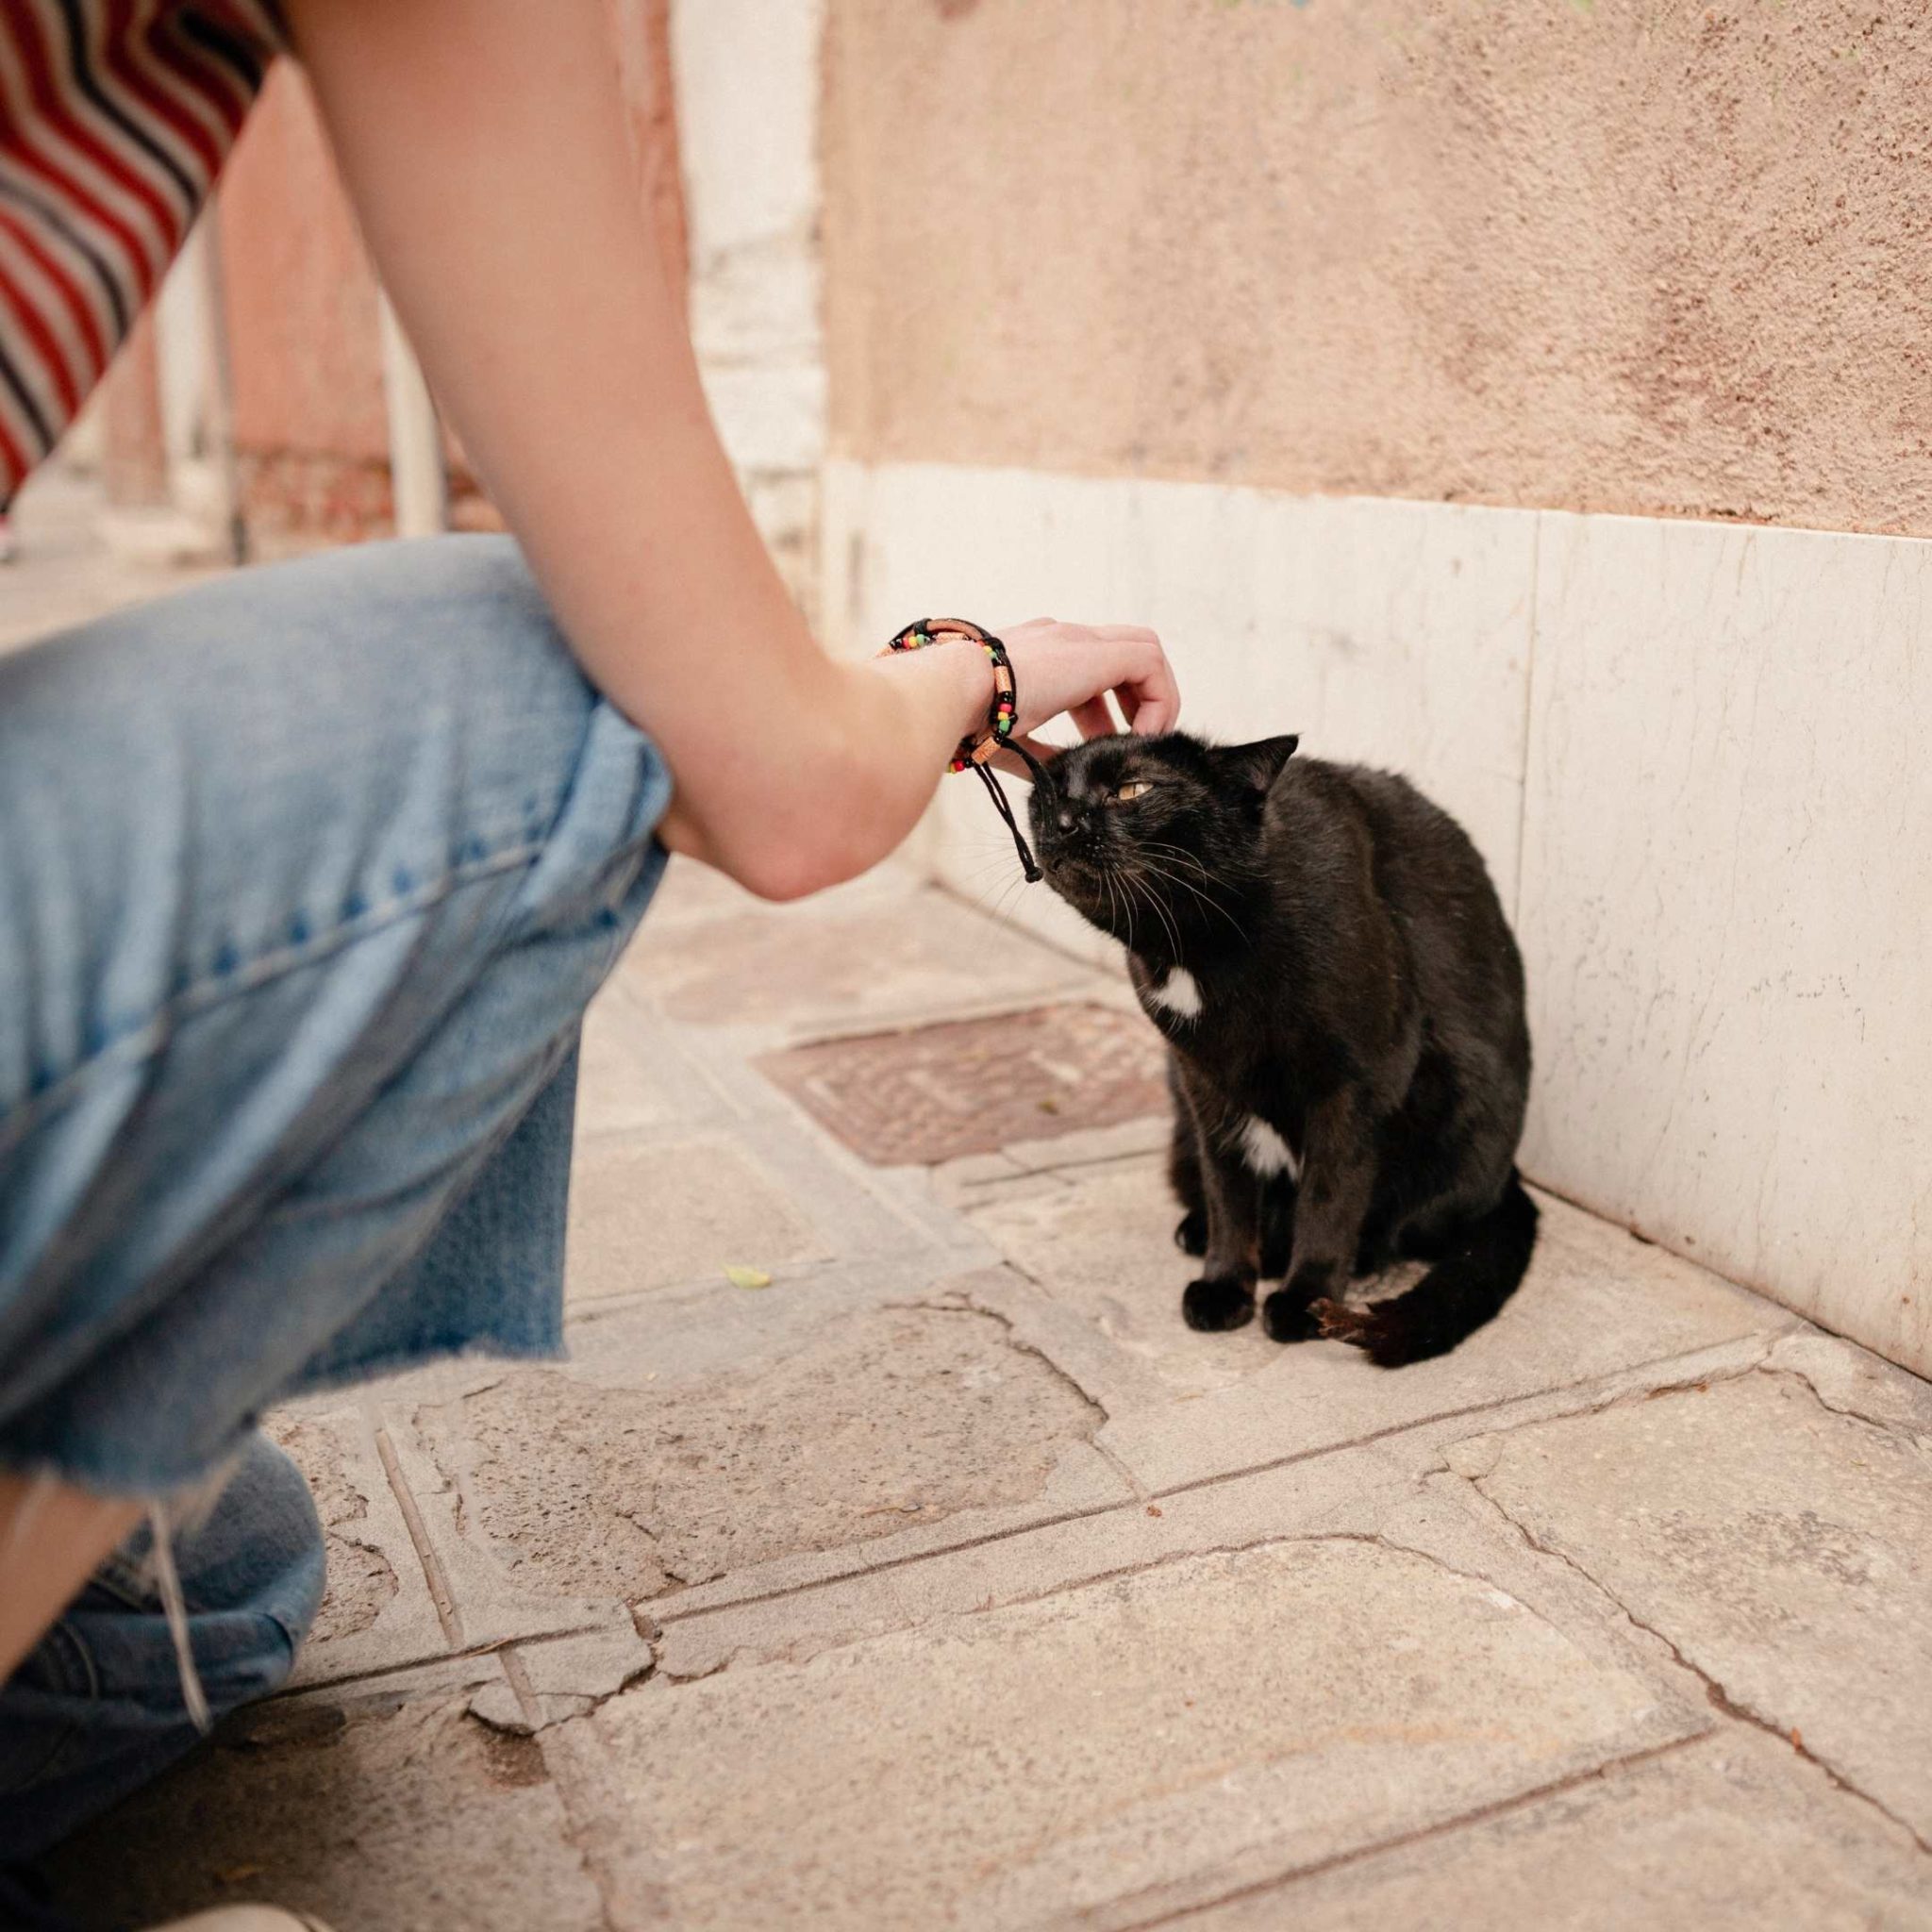 How to Pet a stray Cat